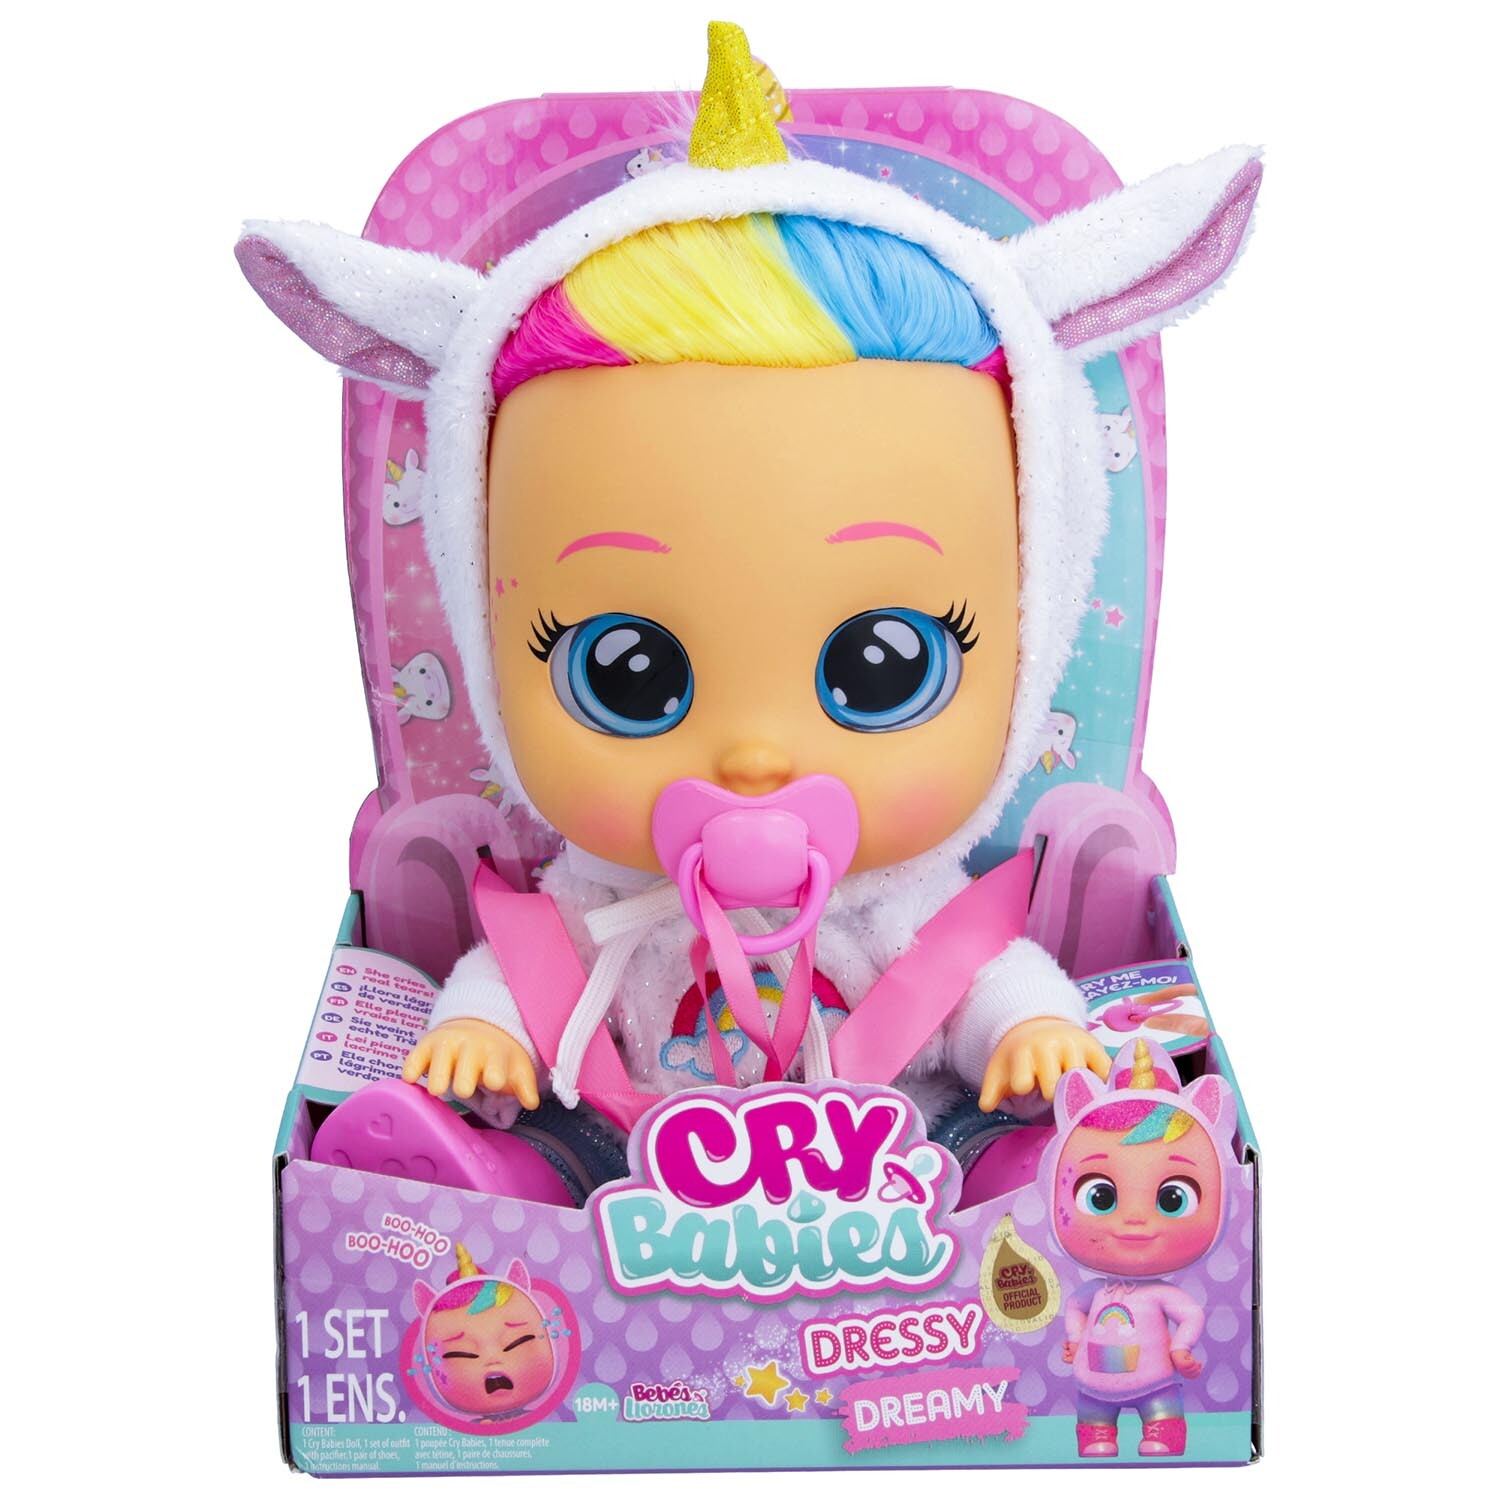 Cry Babies Dressy Dreamy Doll Pink Image 1